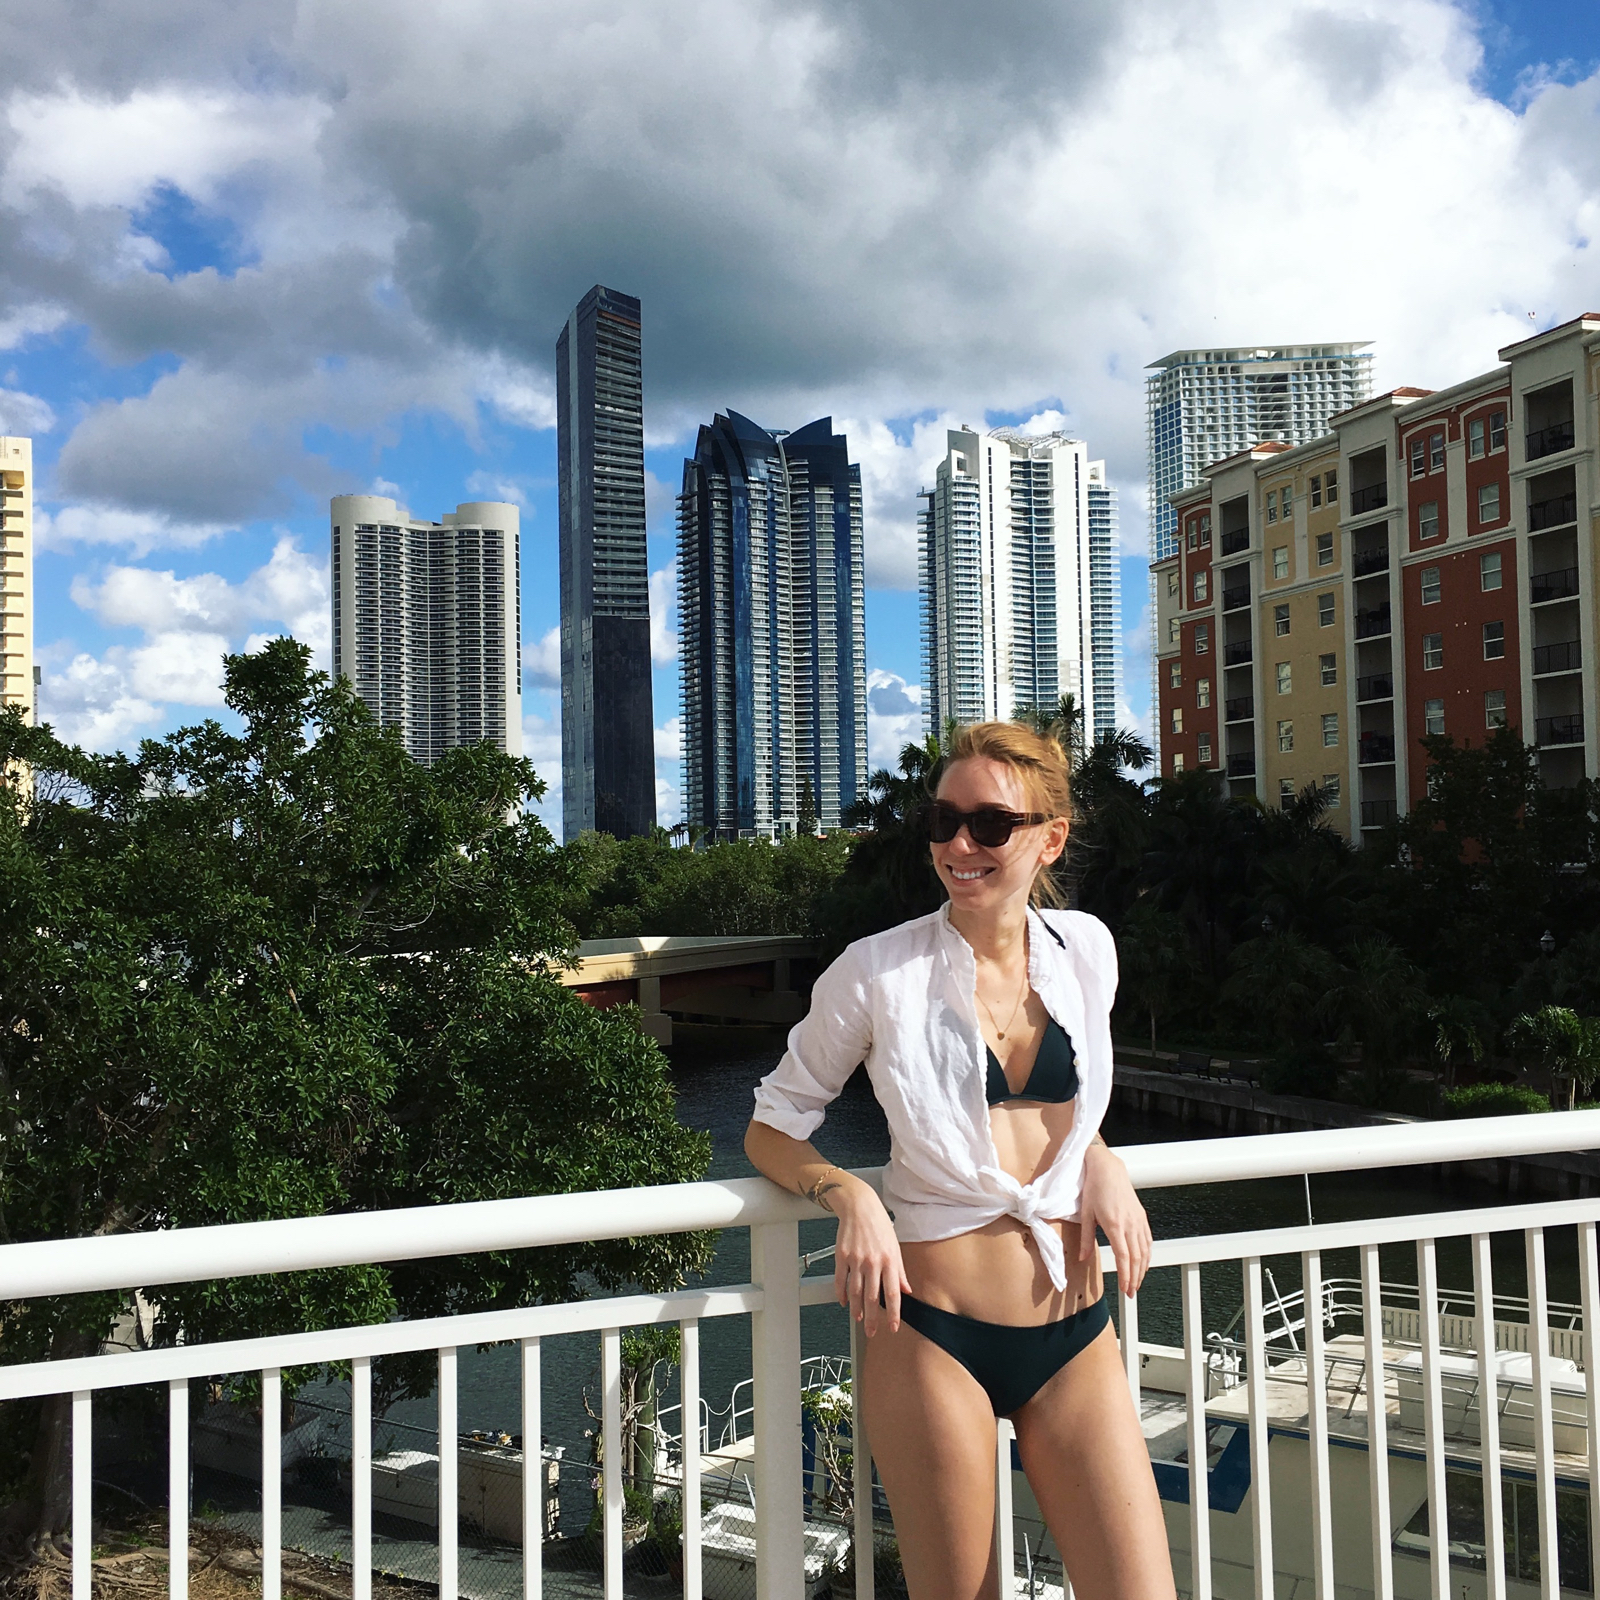 Woman posing in bathing suit with backdrop of Miami